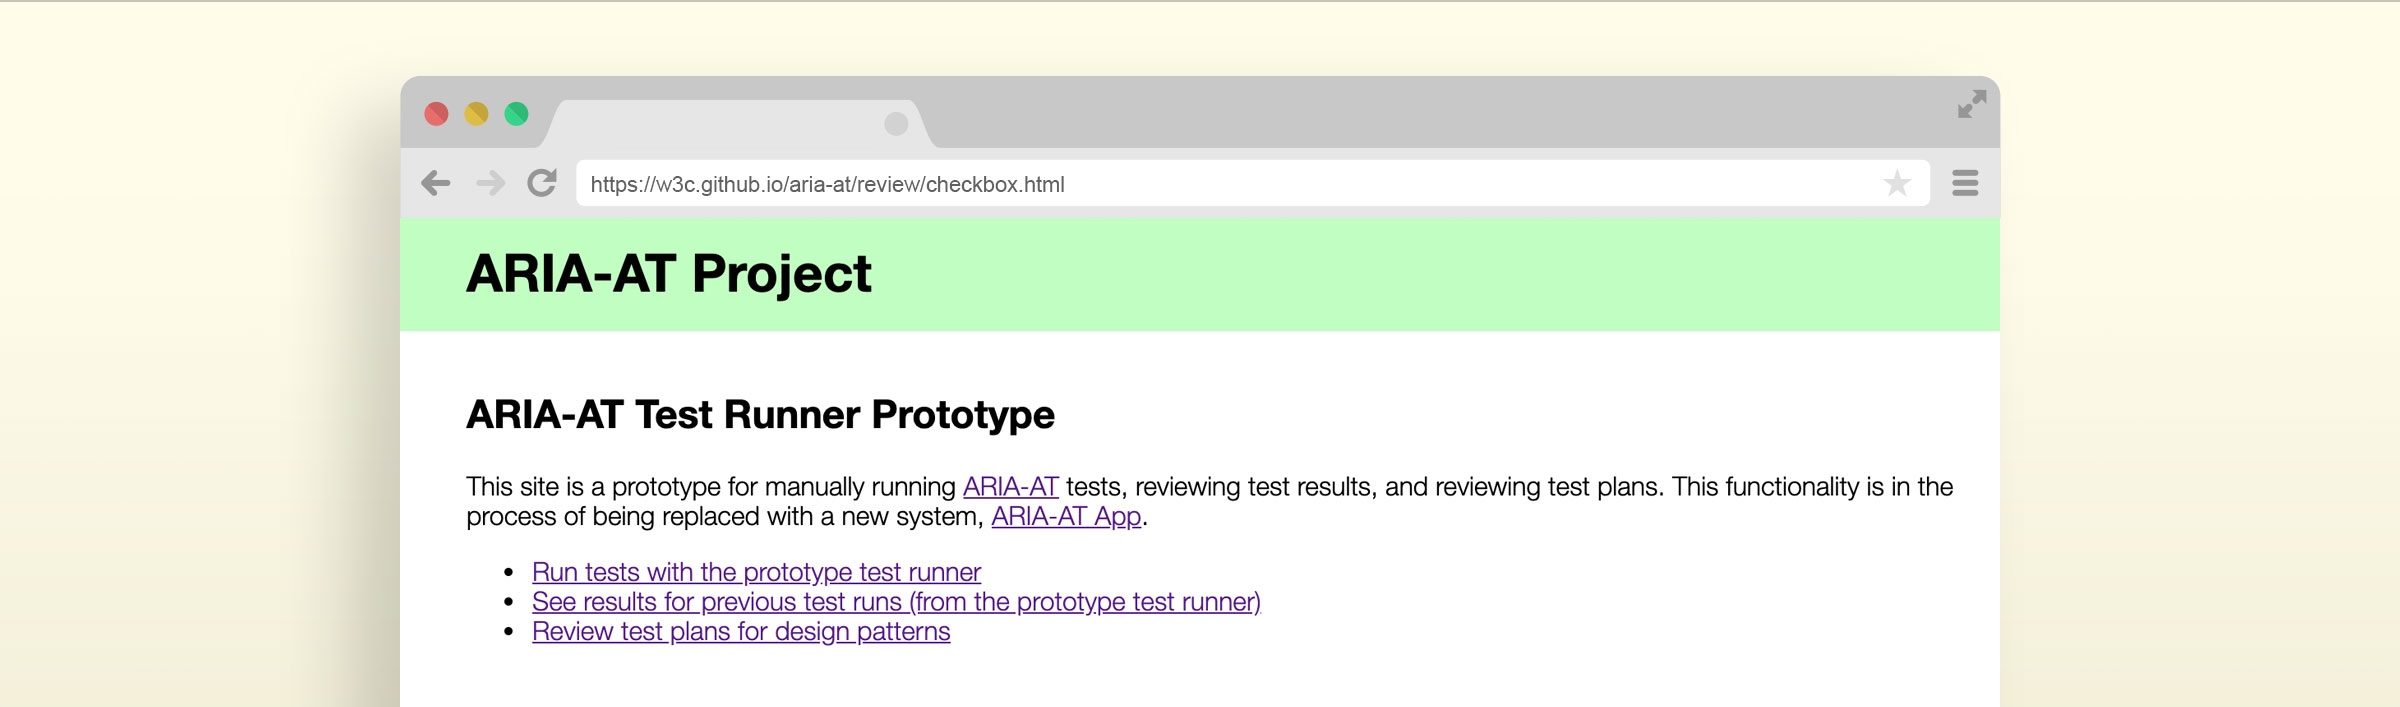 Screenshot of the Aria-AT Test Runner Prototype home page in an illustrated browser window.